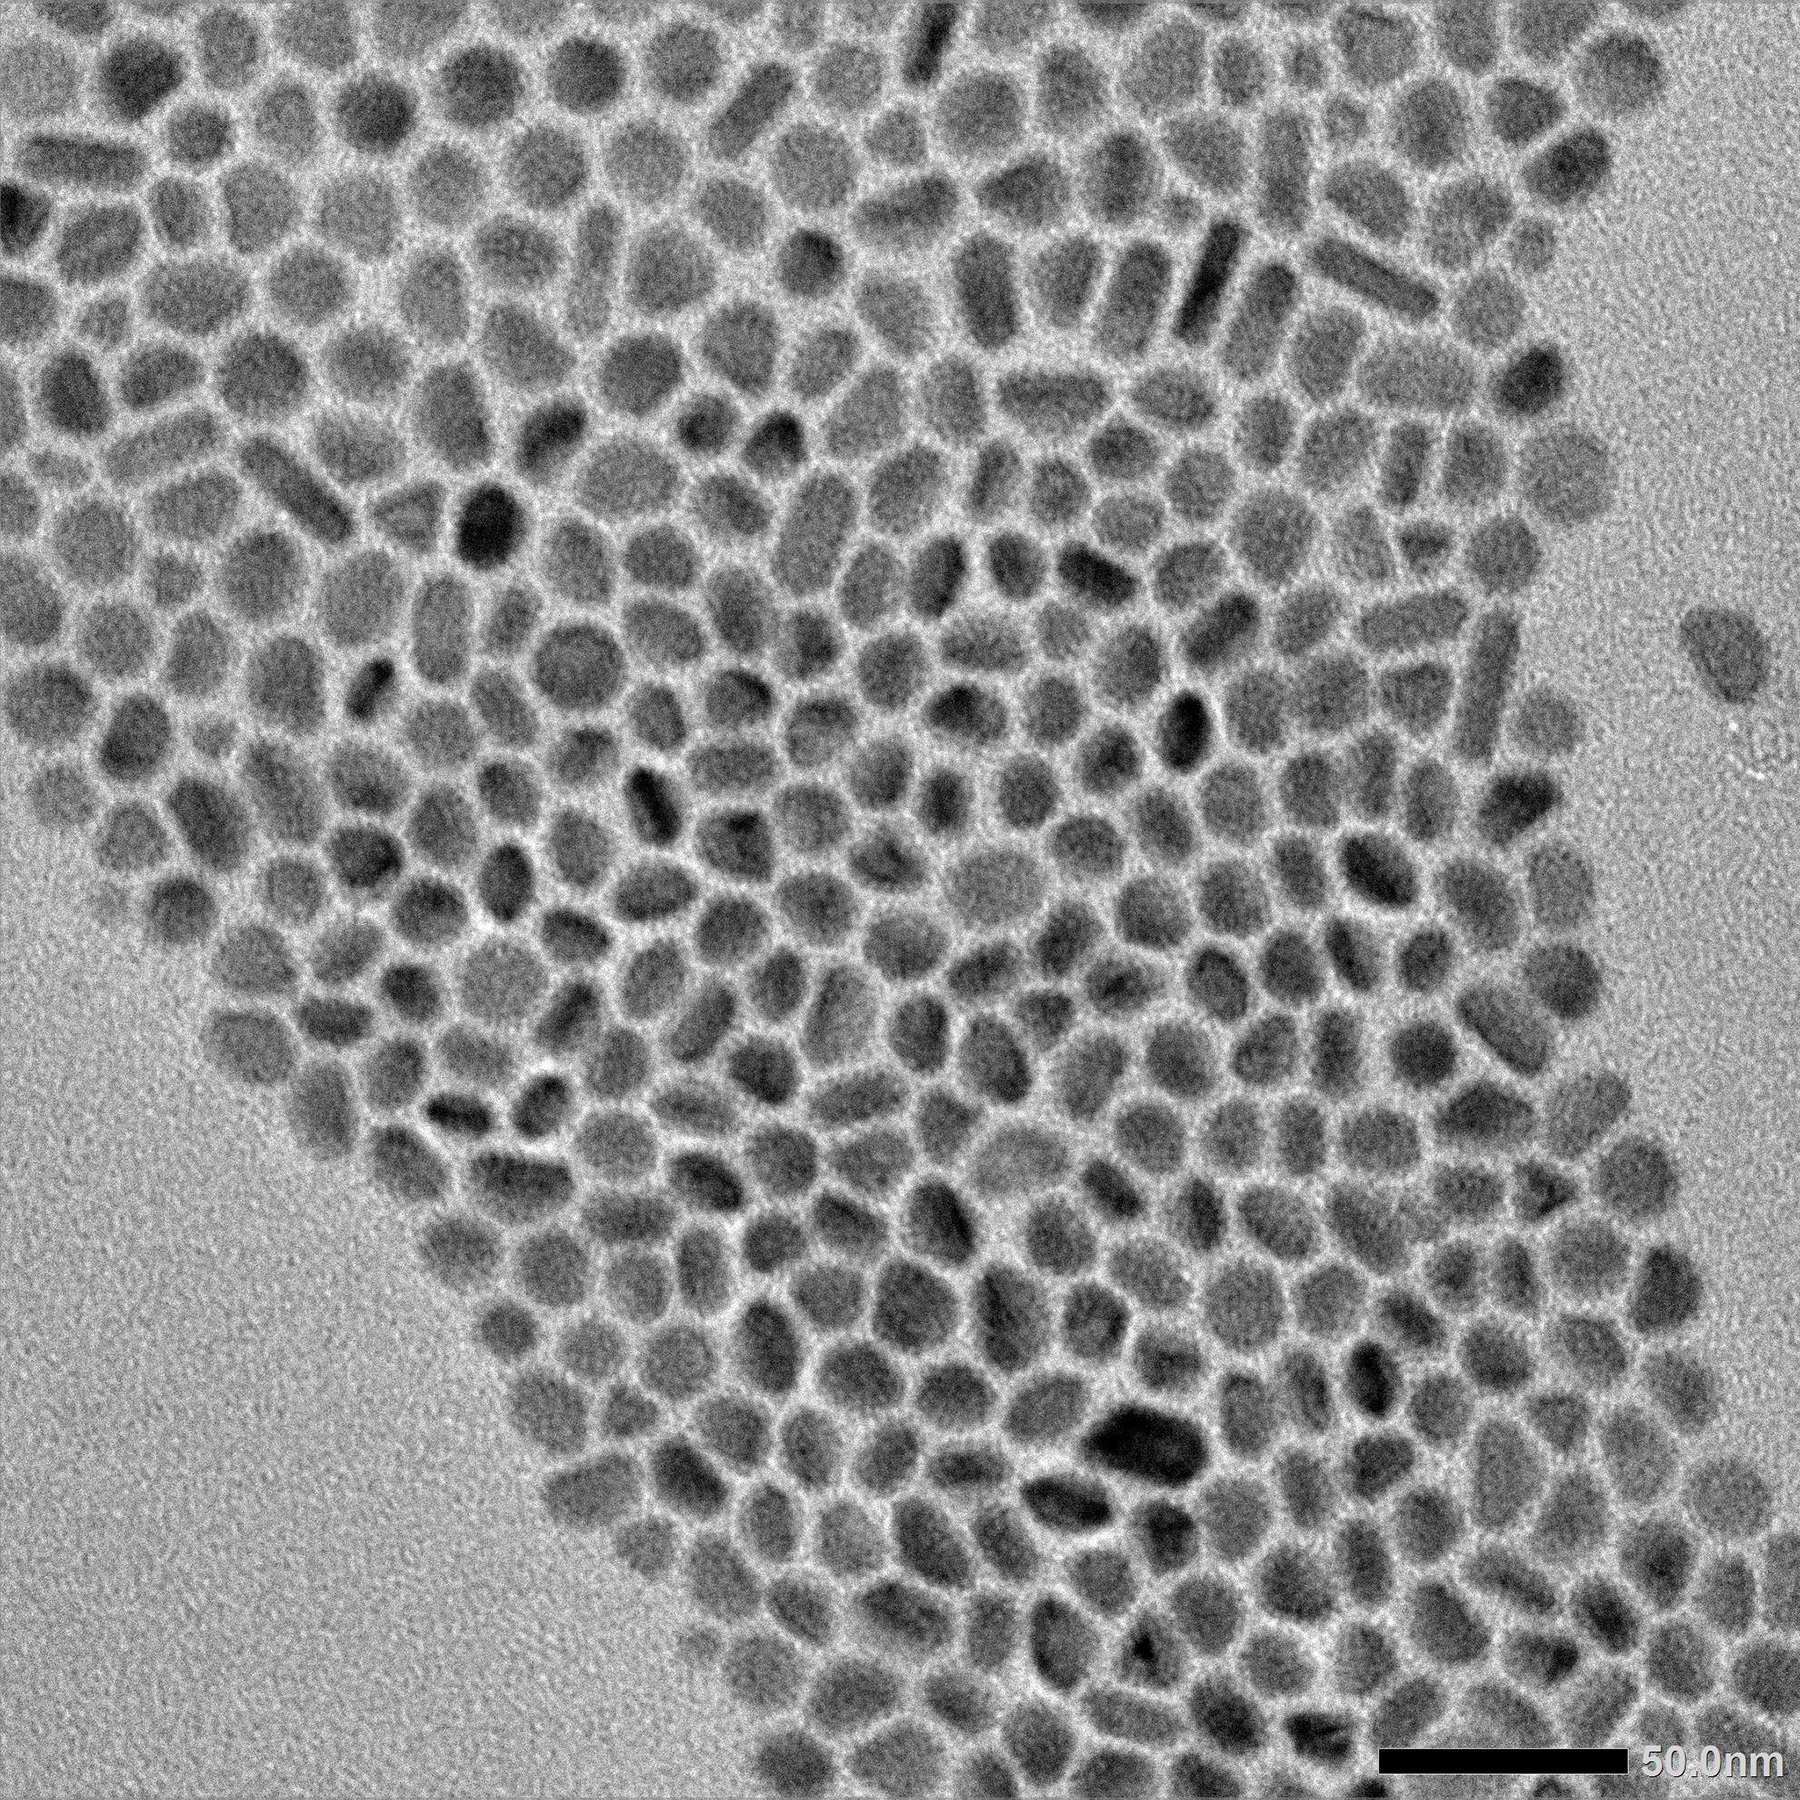 An electron microscope image shows the antimony nanoparticles used to study the spontaneous formation of nanoscale hollow electrodes for use in batteries.  (Credit: Matthew Boebinger, Georgia Tech)